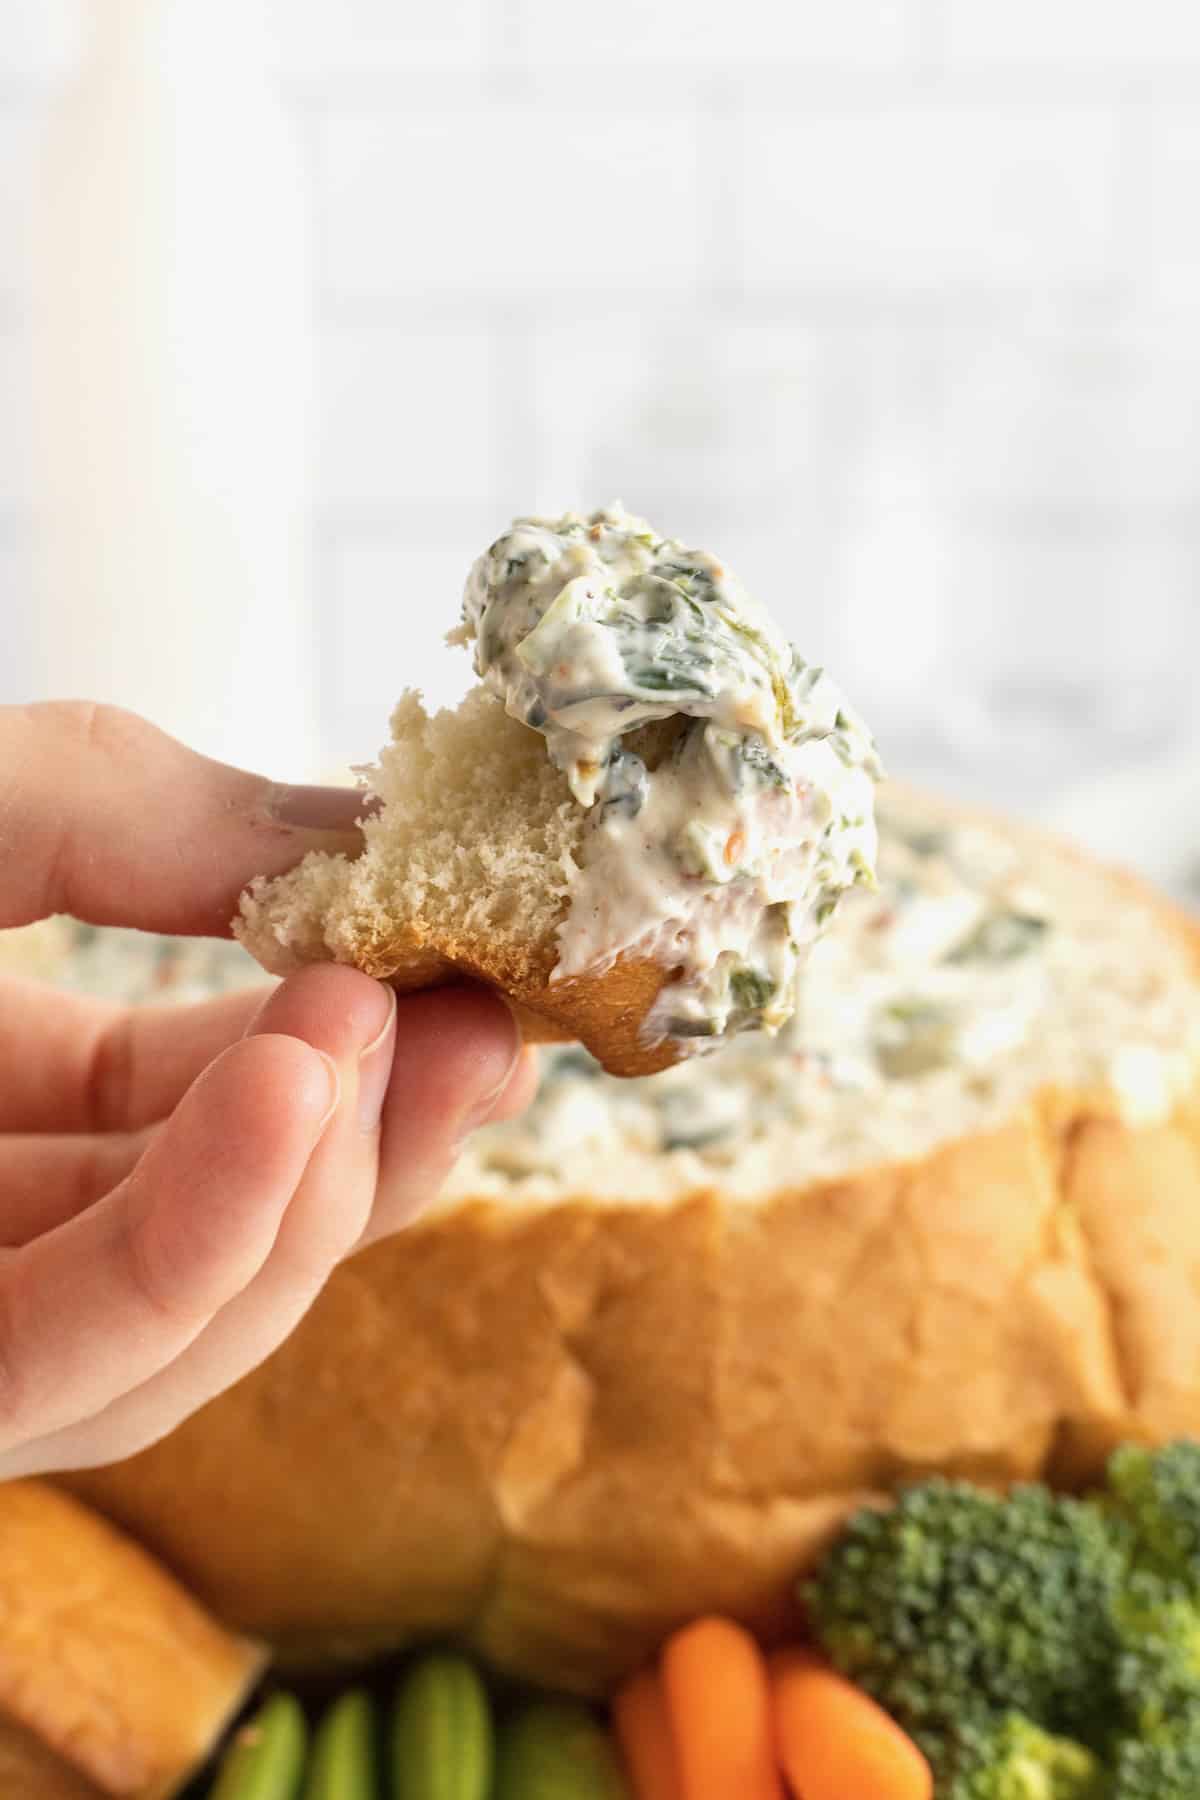 A bite of creamy spinach dip on a bread chunk.